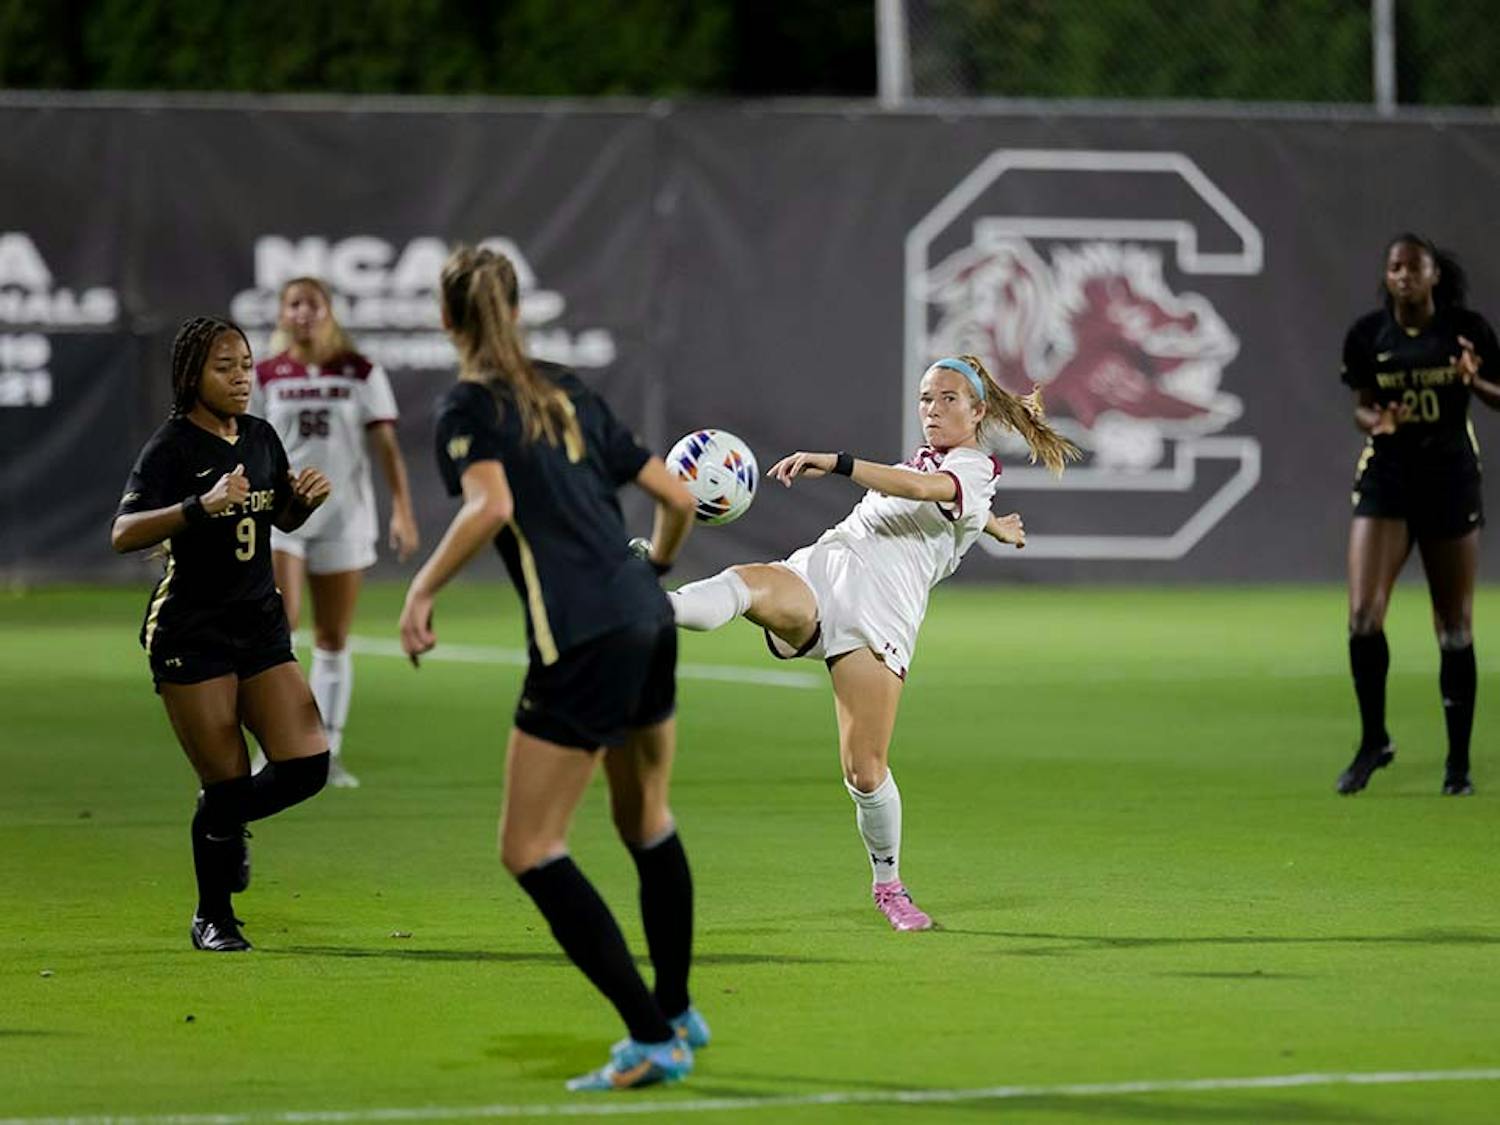 Freshman defender Emily Chico follows the ball with her leg to gain control of possession. South Carolina beat Wake Forest 2-0 at Stone Stadium on Nov. 12, 2022.